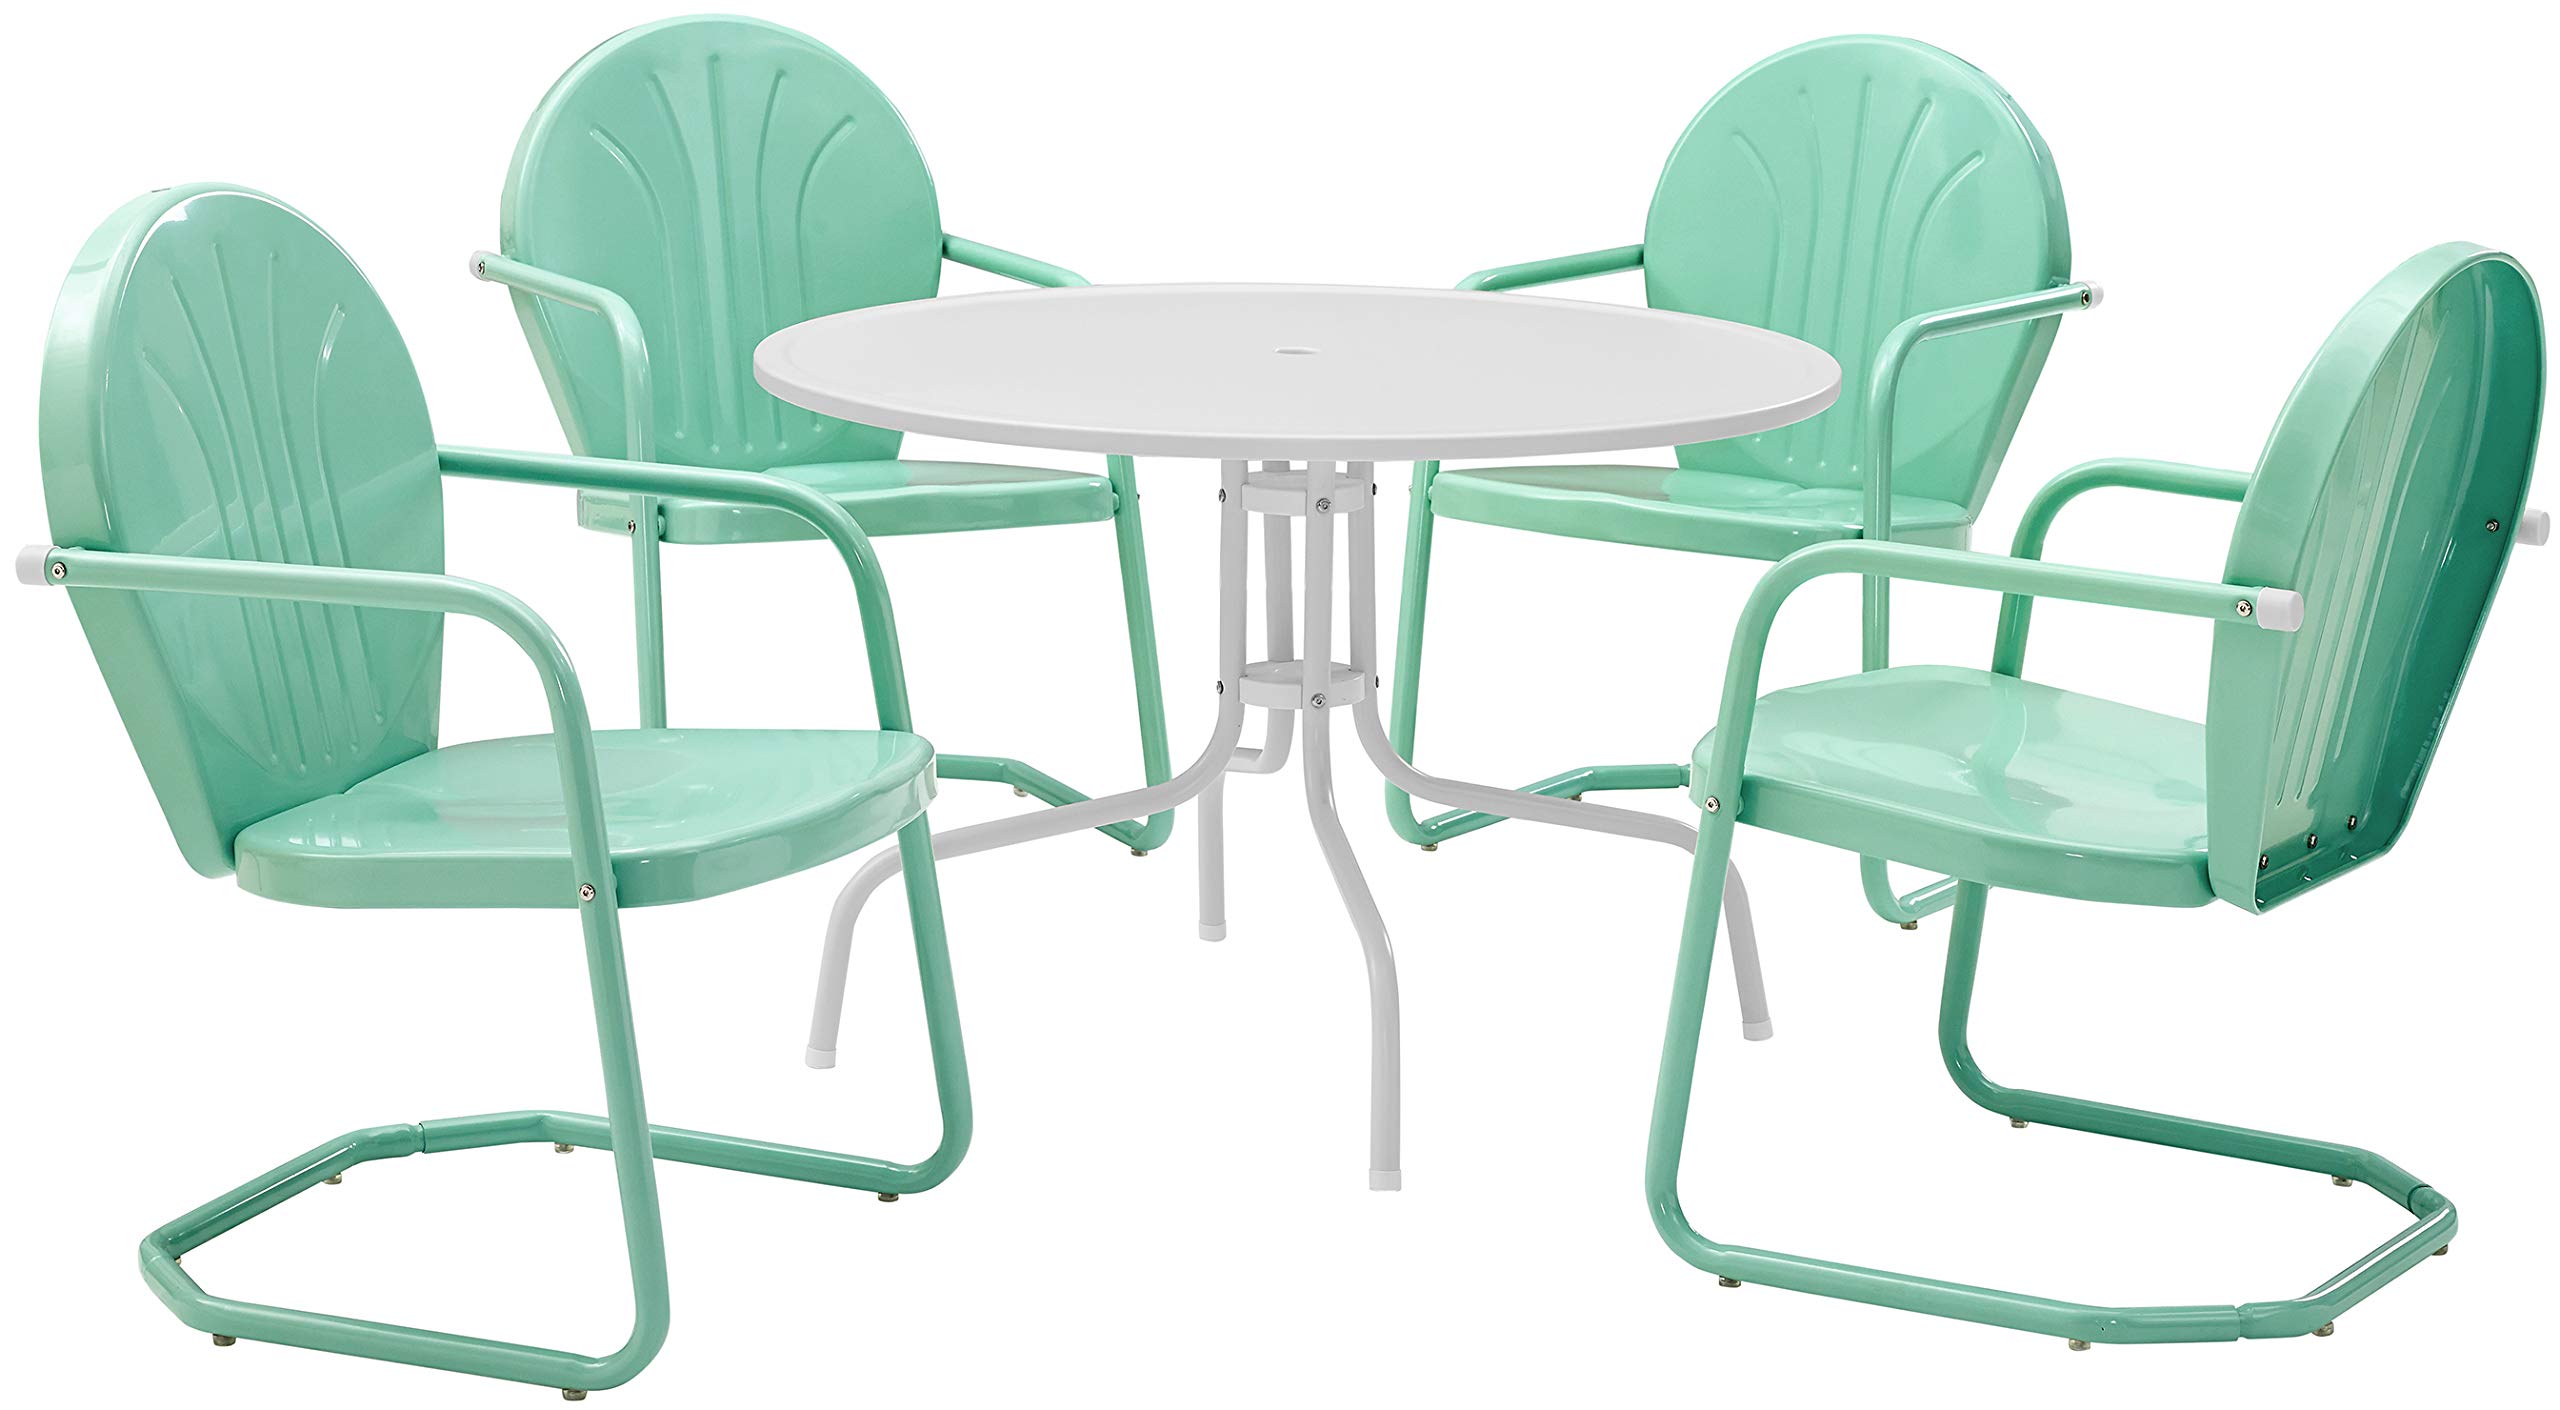 Crosley Furniture KOD10010AQ Griffith Retro Metal Outdoor 5-Piece Dining Set with 39" Table and 4 Chairs, White and Aqua